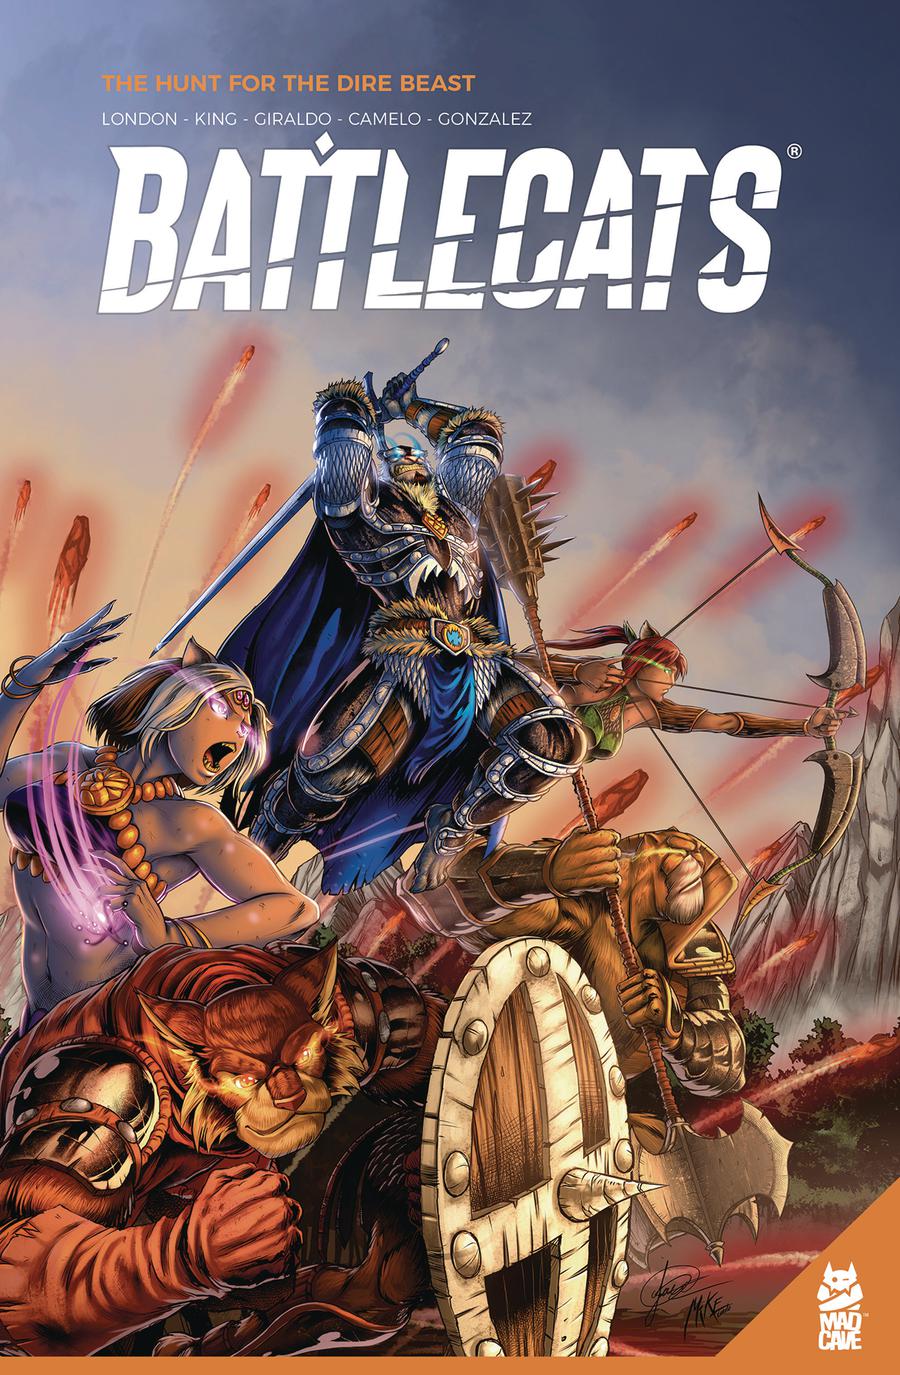 Battlecats Vol 1 The Hunt For The Dire Beast TP